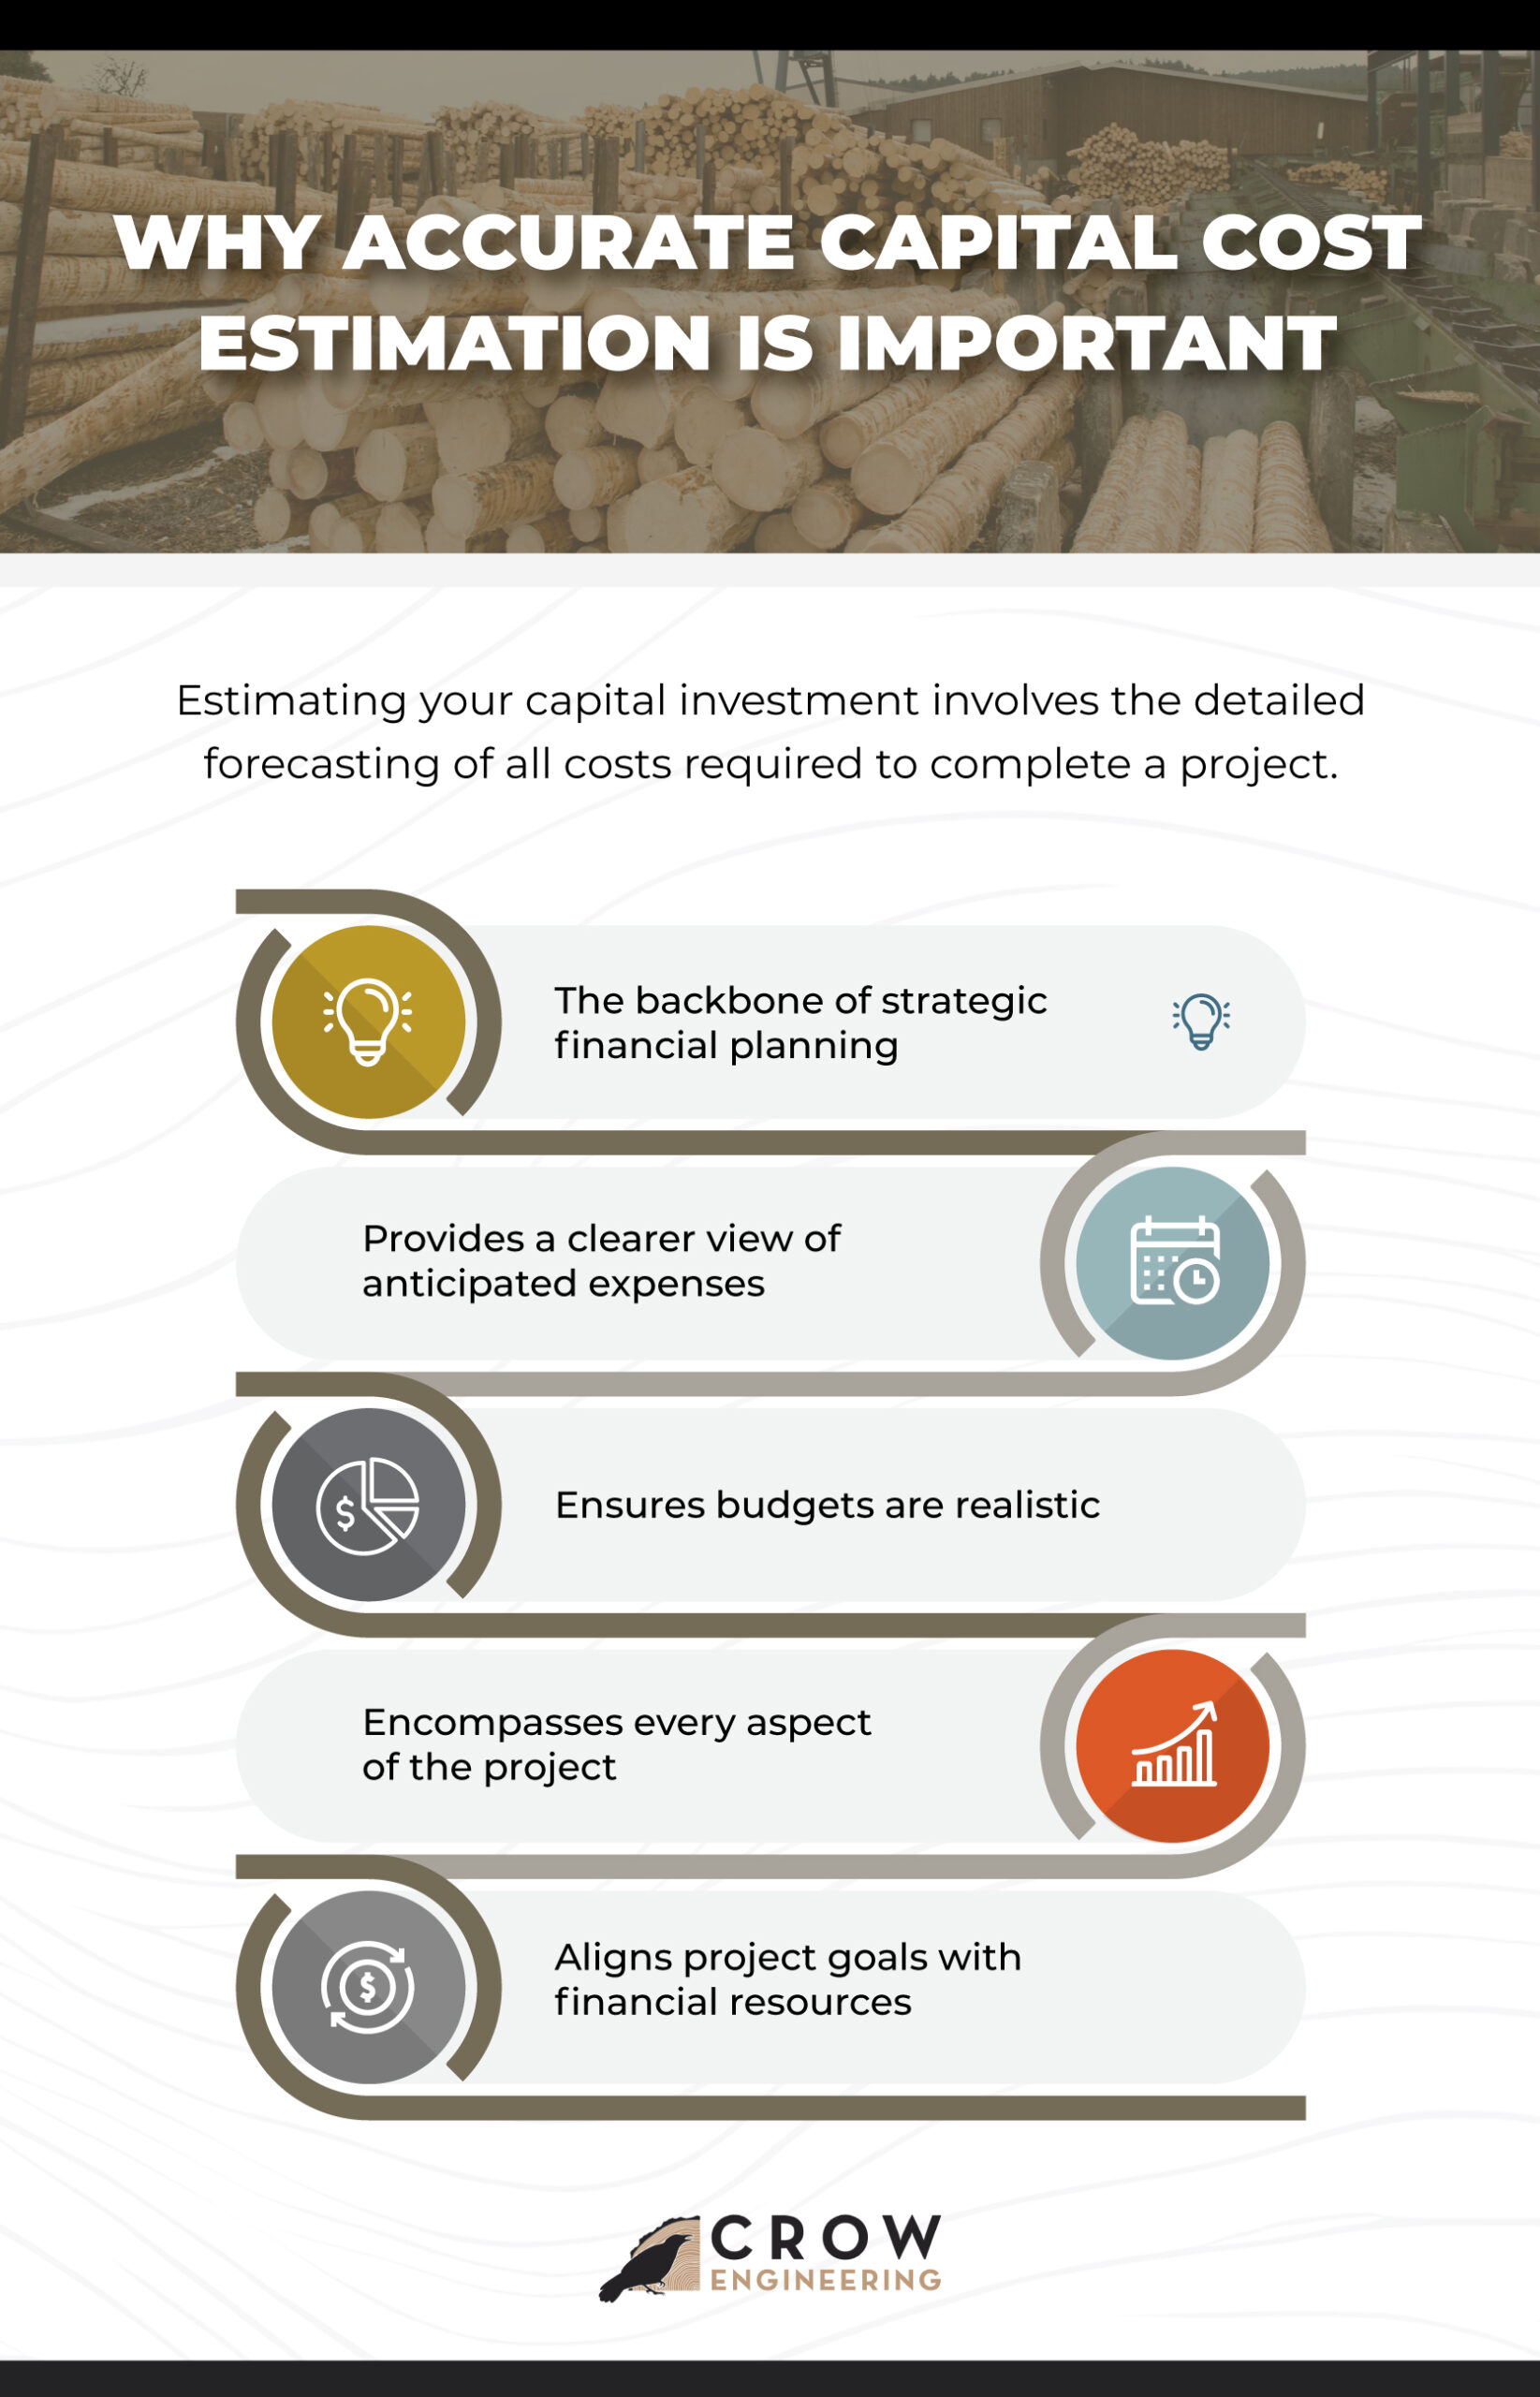 Why Accurate Capital Cost Estimation Is Important- Infographic